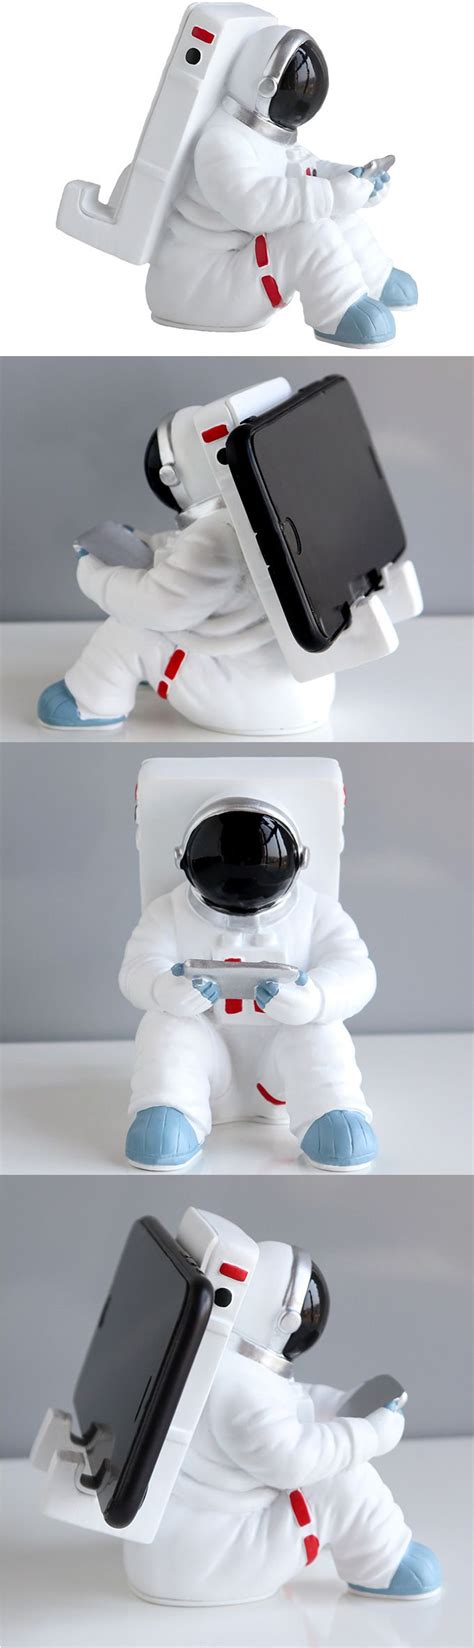 Cartoon Astronaut Mobile Phone Cell Phone Iphone Ipad Holder Stand